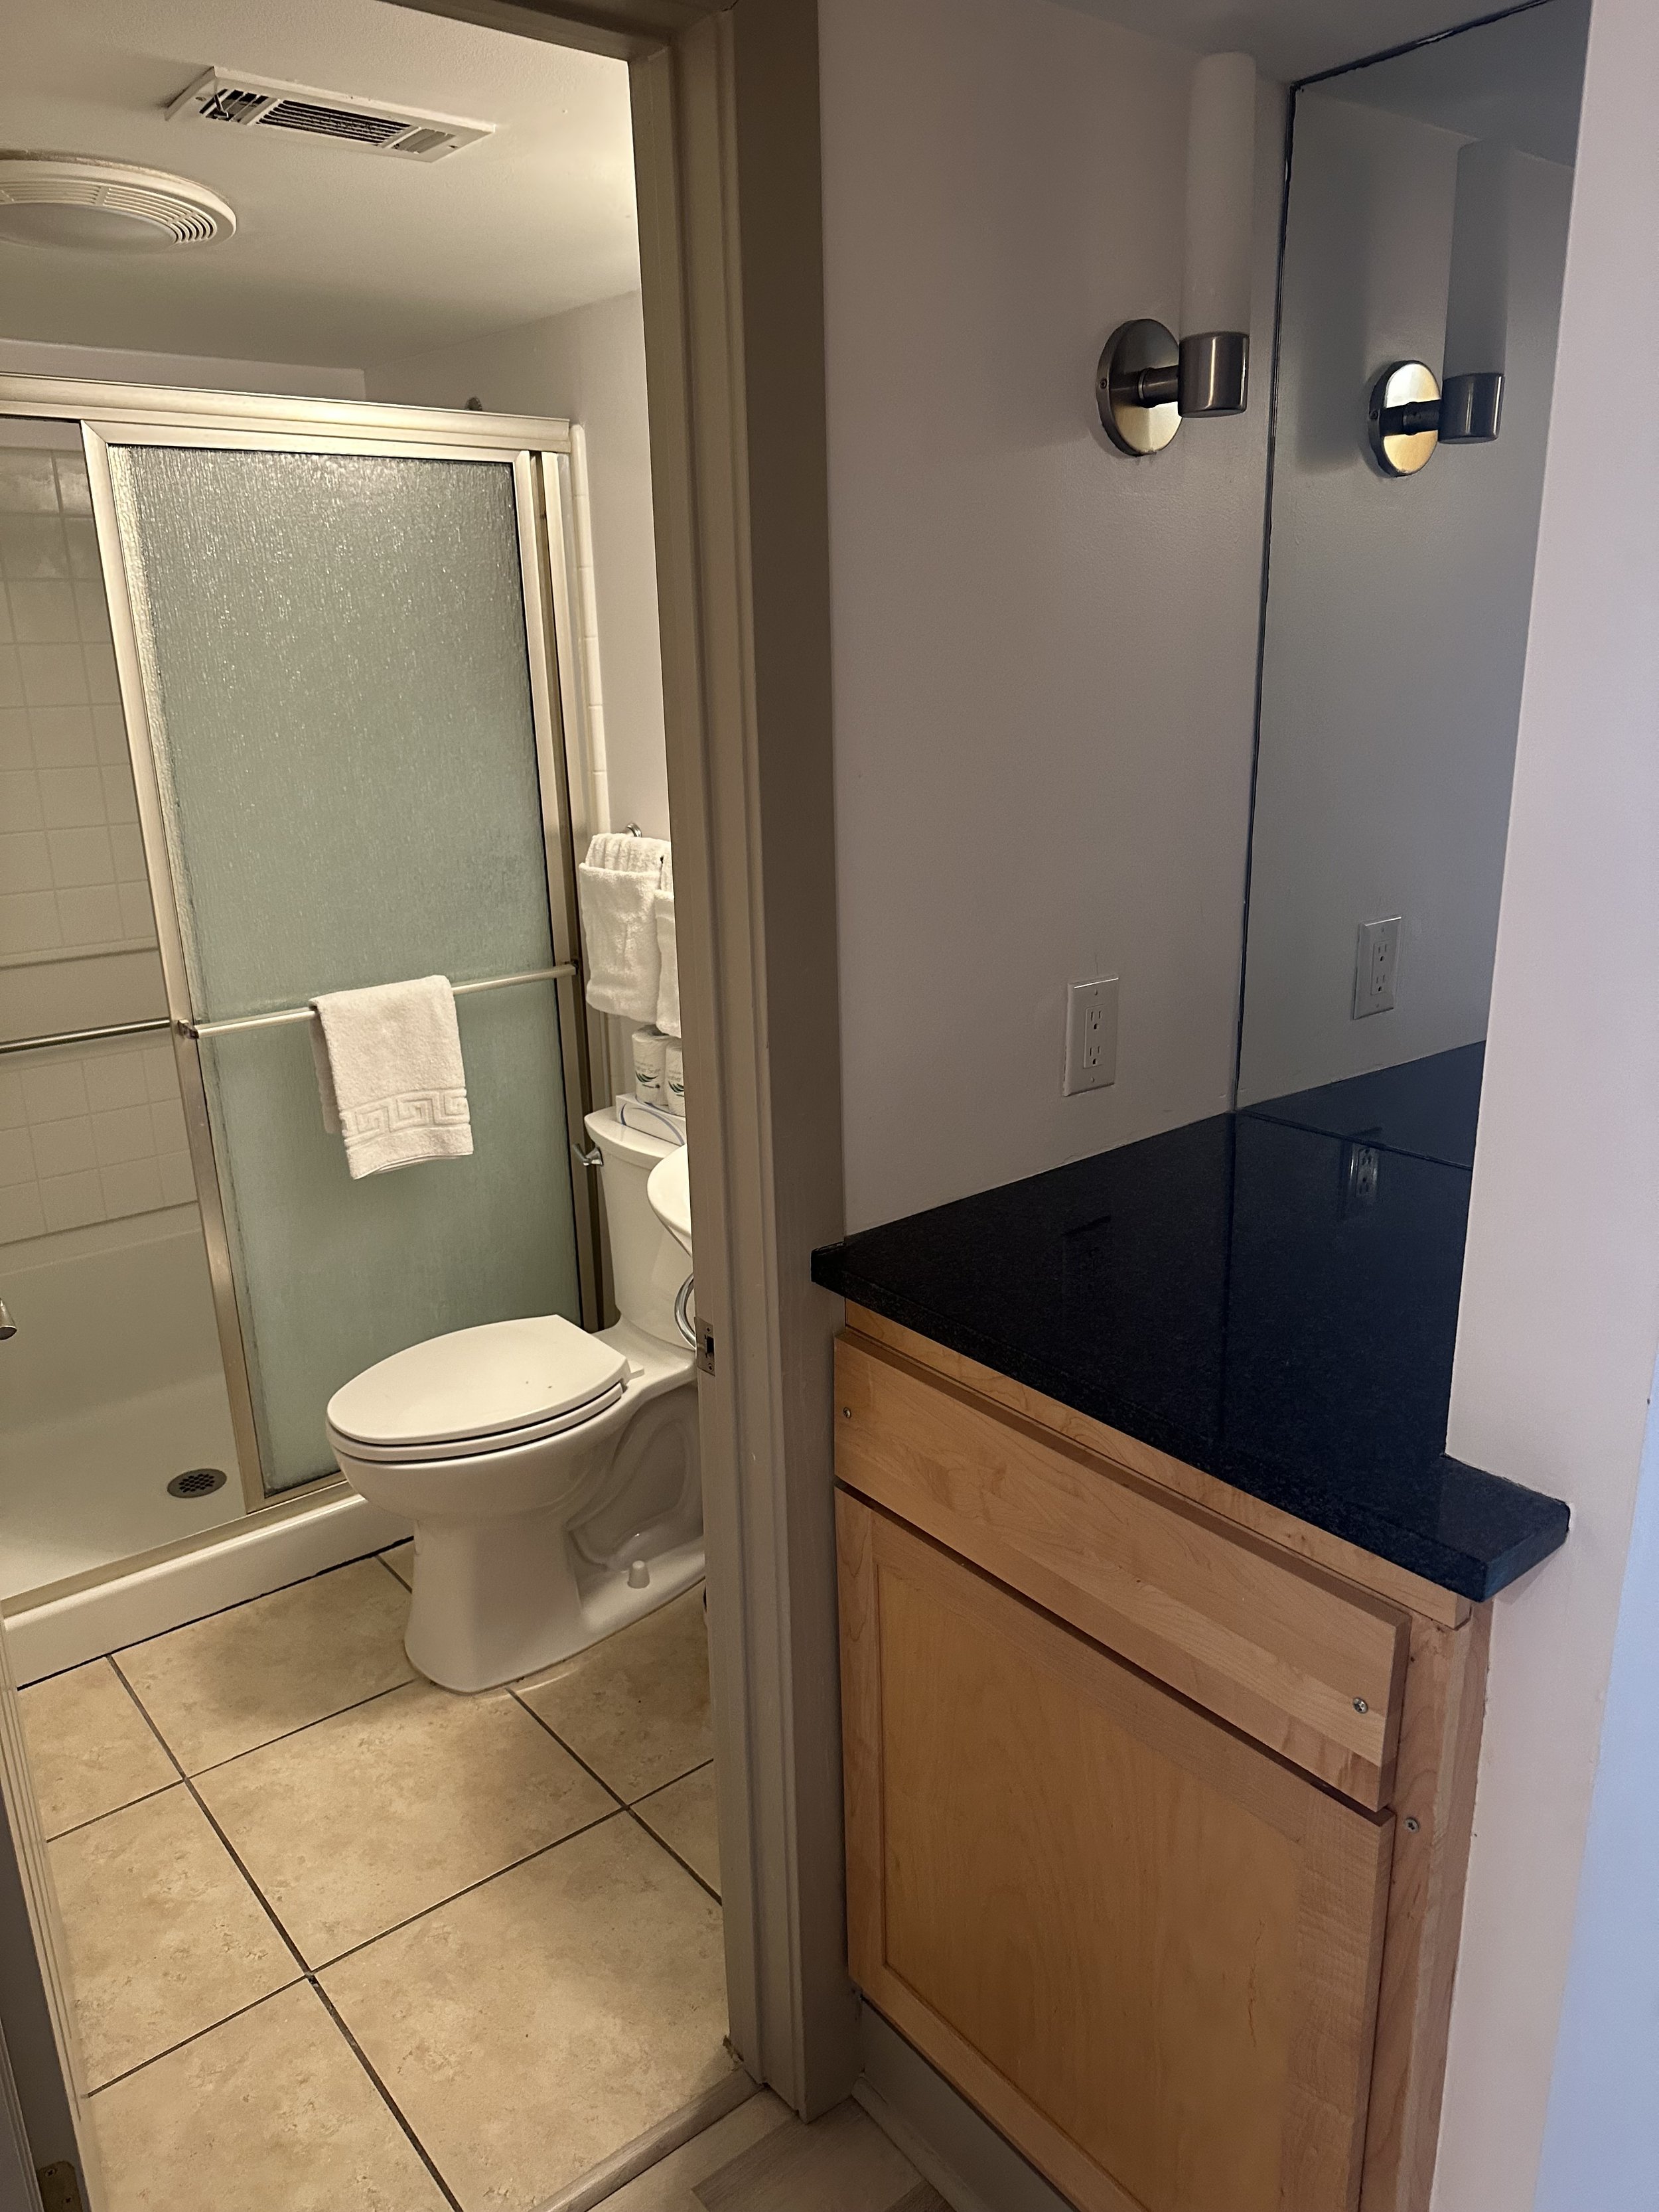 UPDATED BATH WITH WALK-IN SHOWER AND SEPARATE VANITY AREA